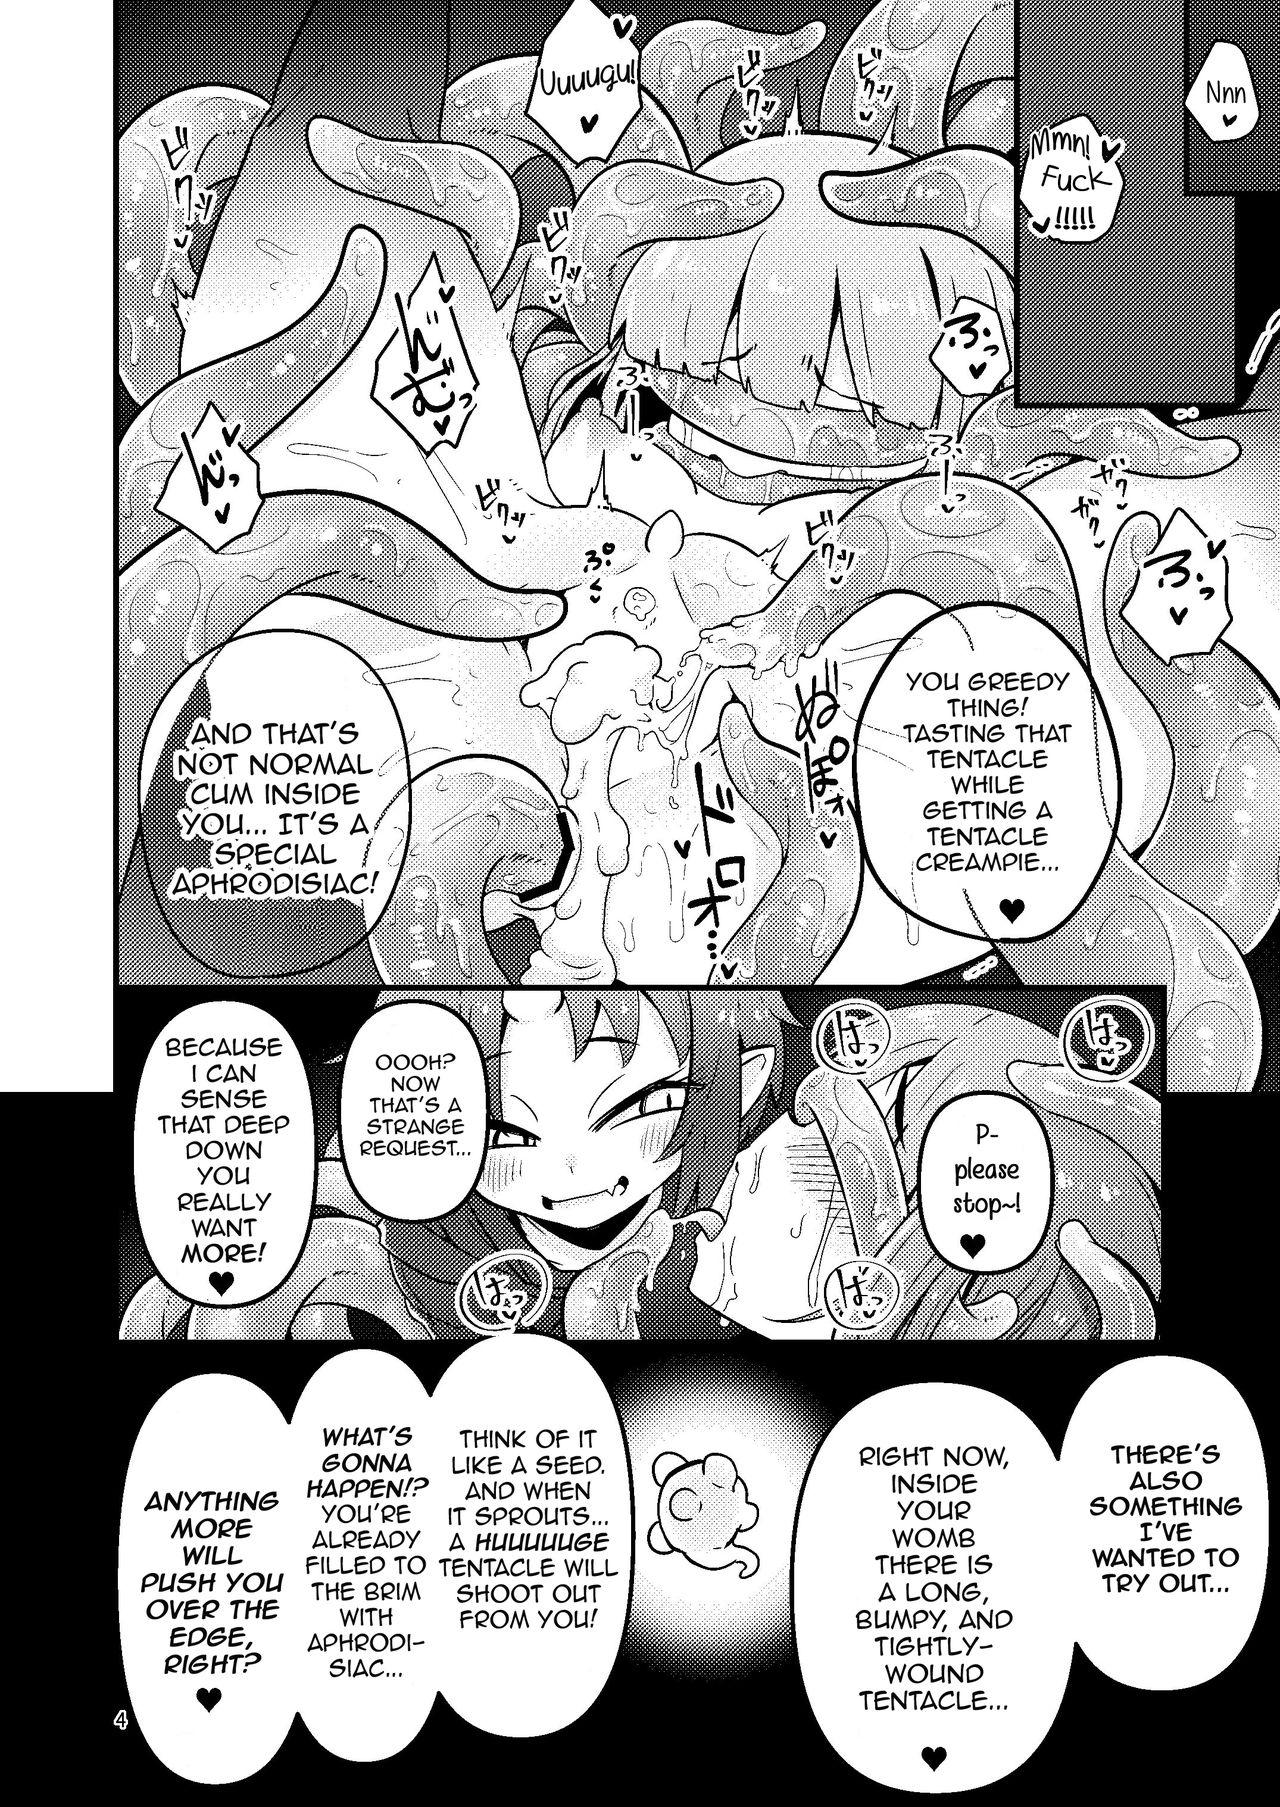 Small Hoodie of the Tentacle Tribe - Original Hardcore Gay - Page 4